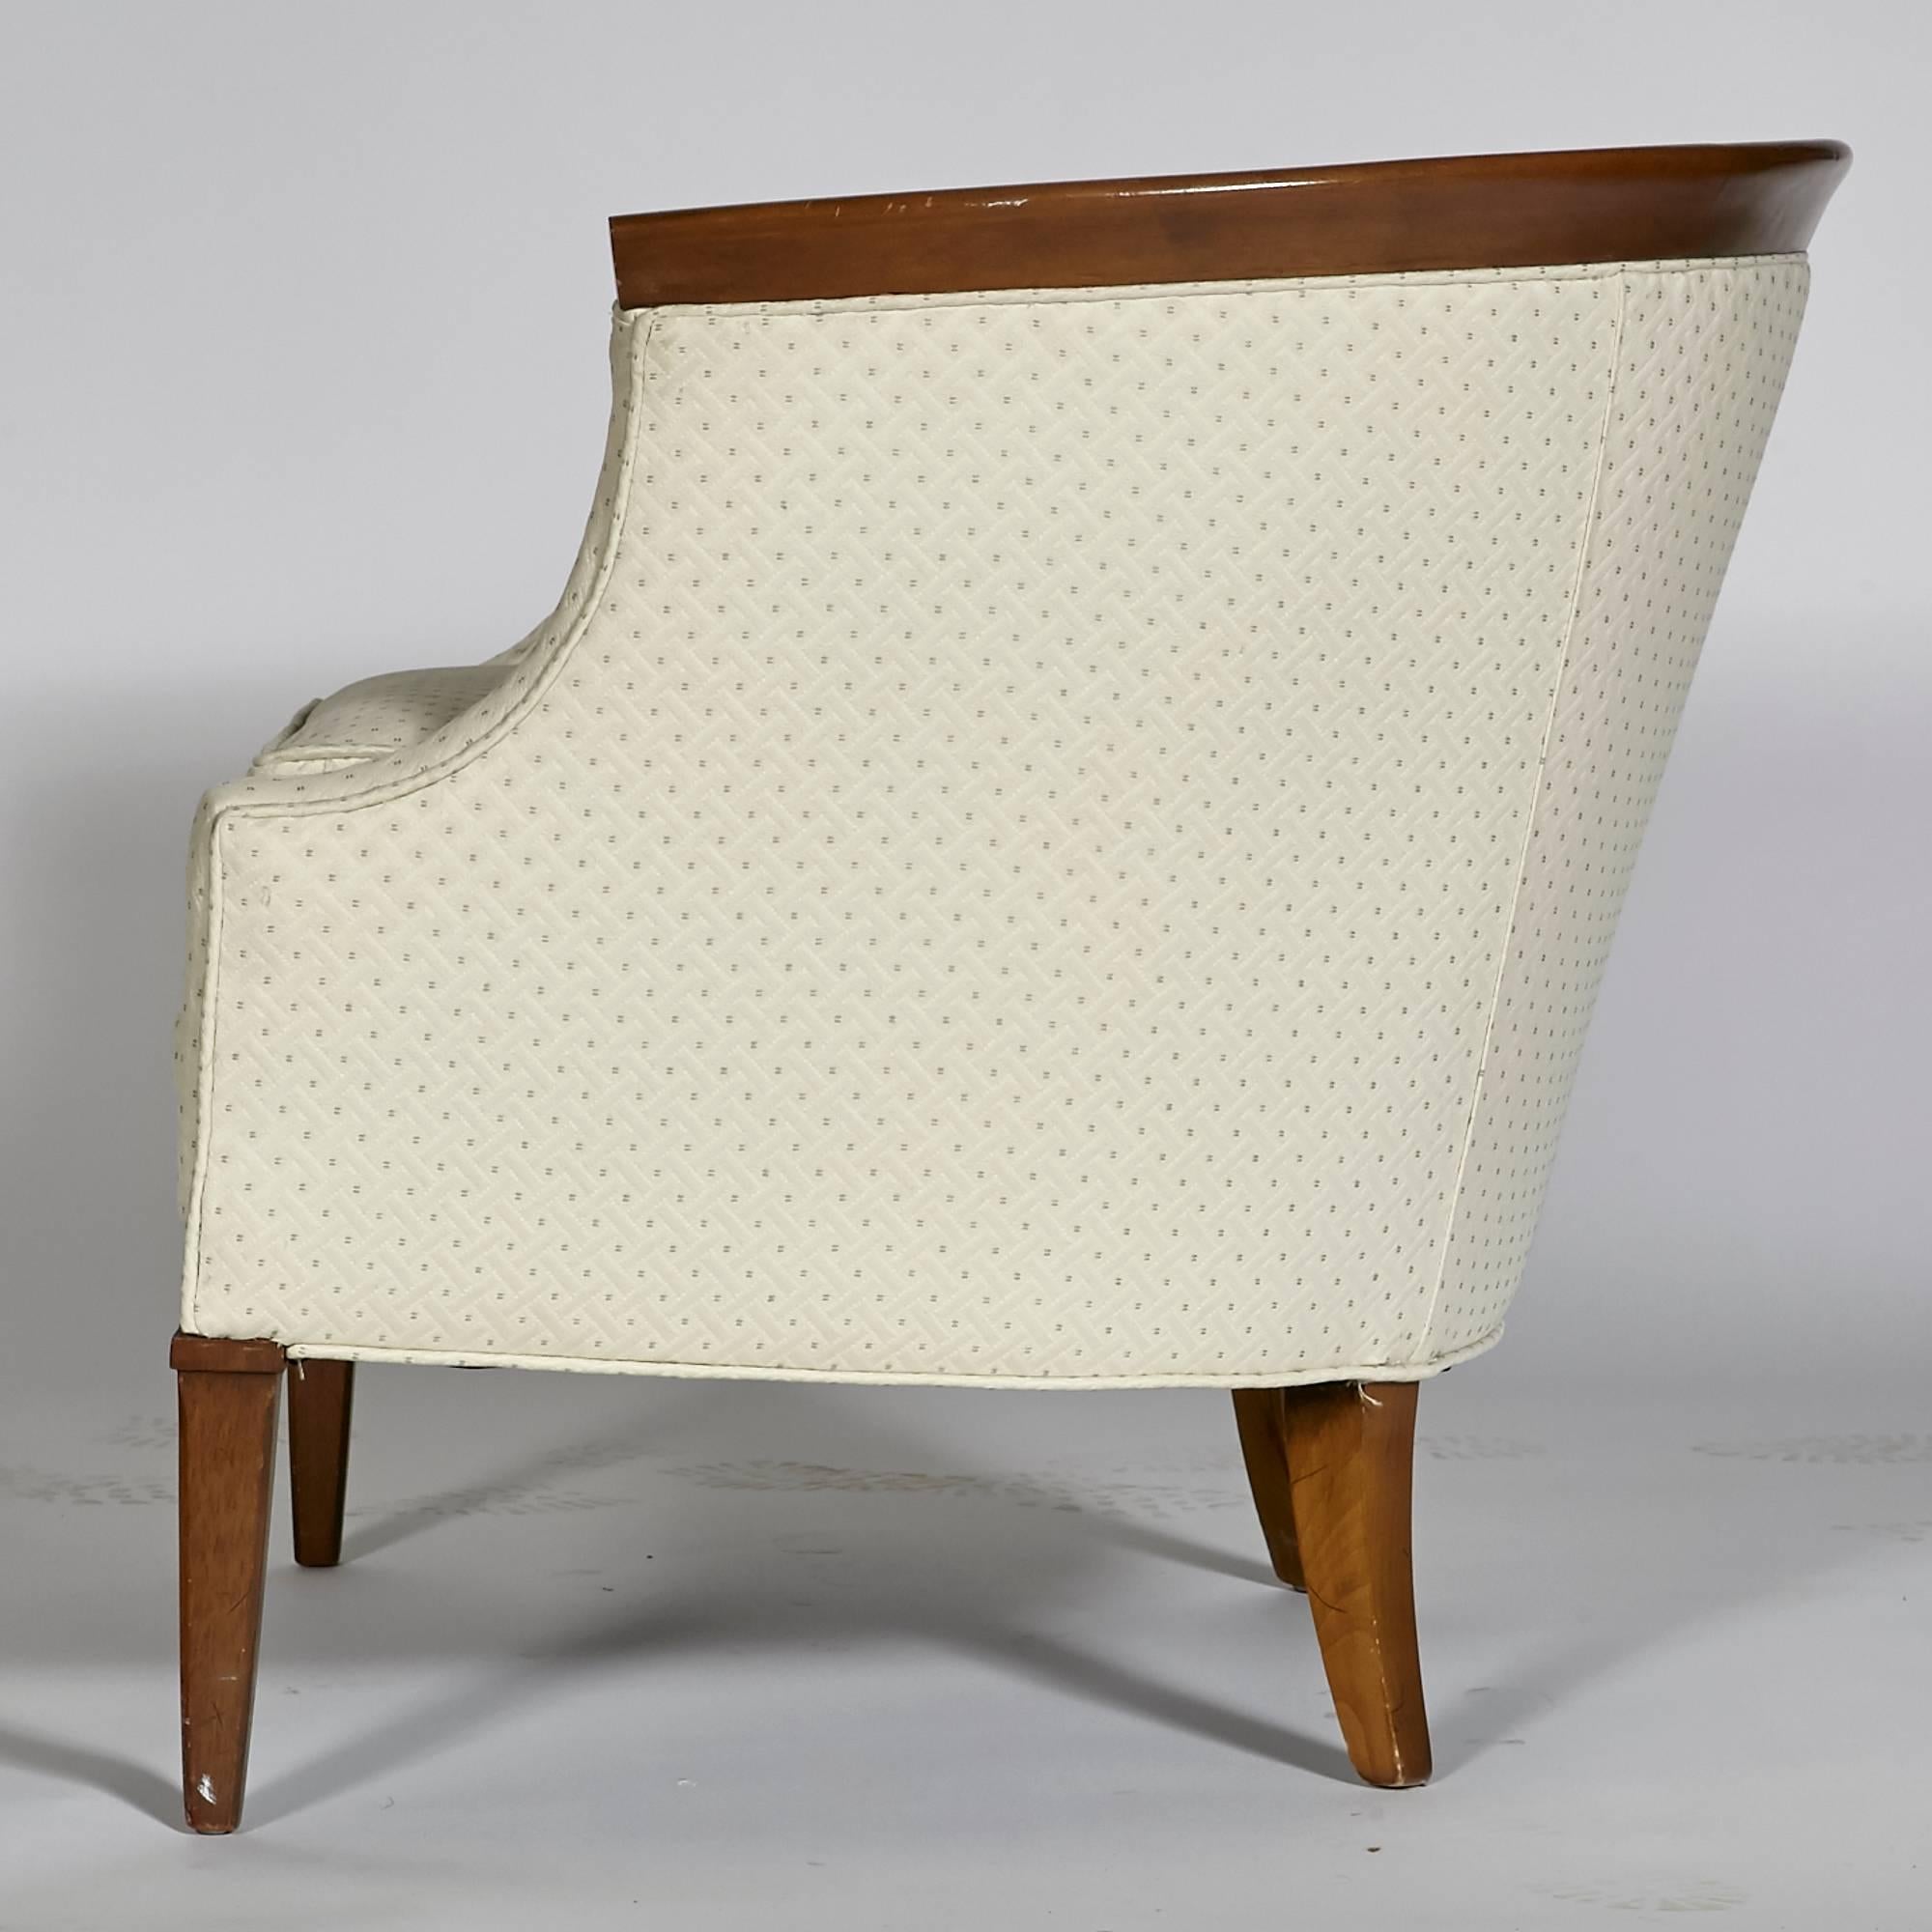 Vintage 1960s walnut sculpted lounge chair with a tufted and curved back designed by Erwin-Lambeth. Chair fabric is not original but recommend fabric be replaced. Cushion foam and structure is sturdy. Light wear to legs from use. Unmarked.